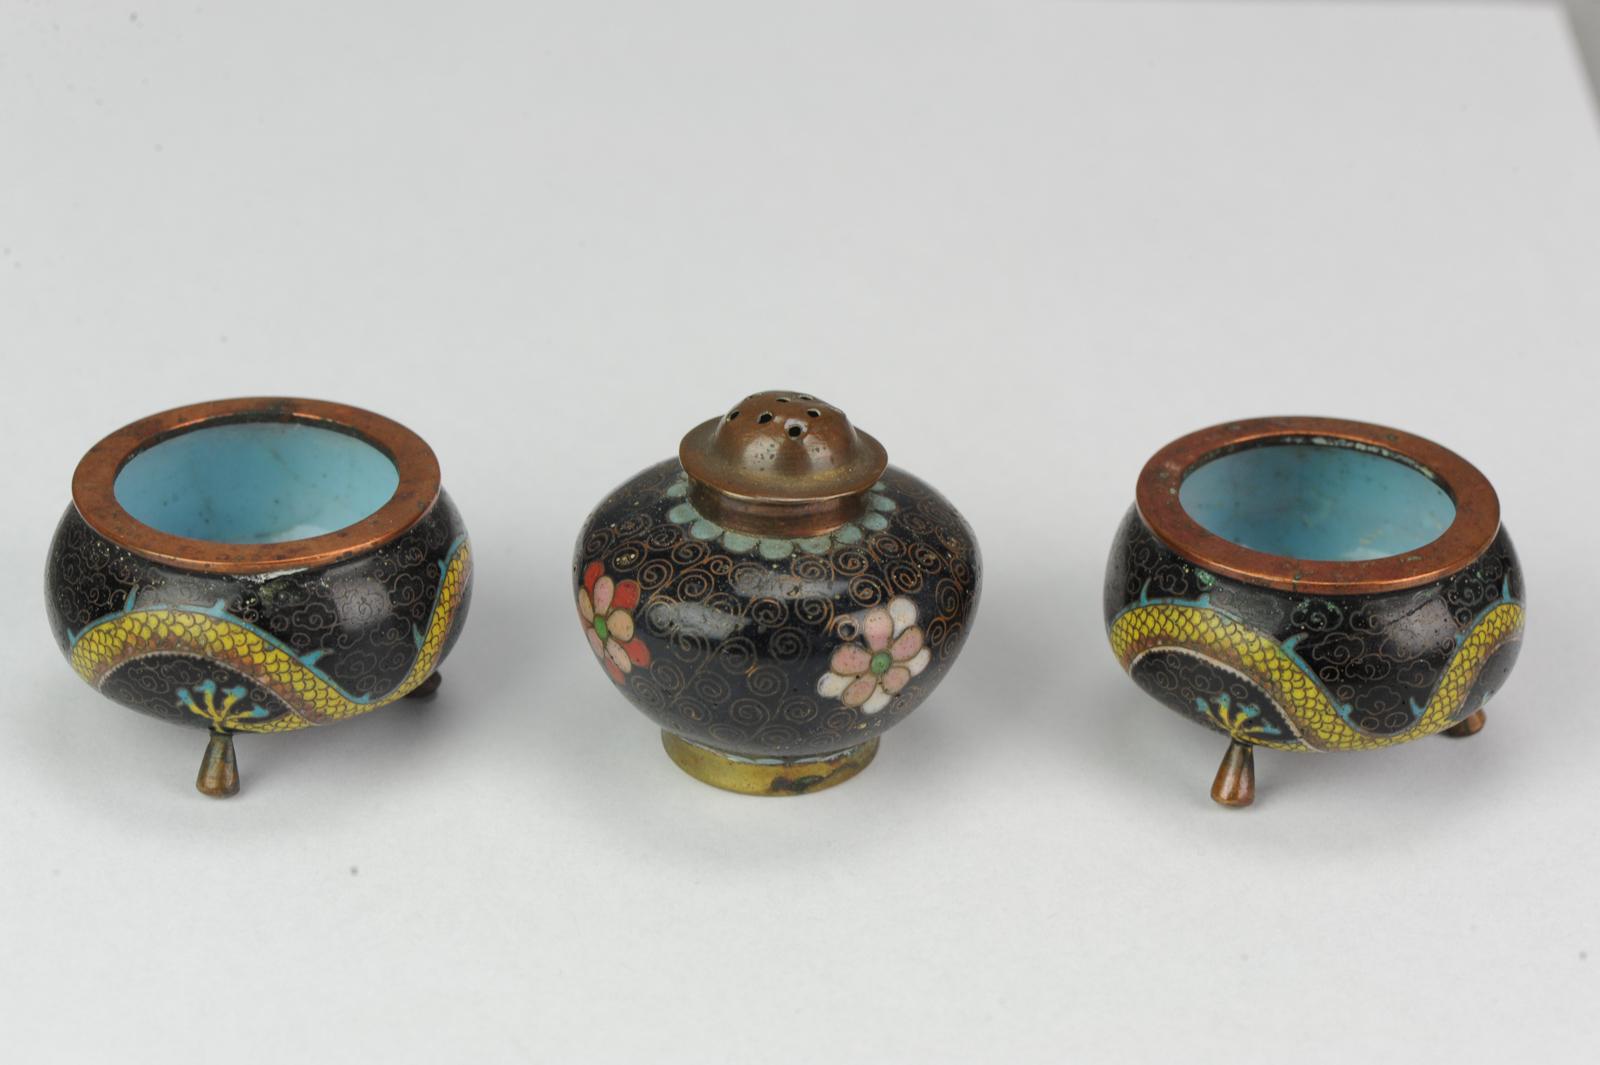 Top Antique Bronze Cloisonné Salt Cellar Tripods China, 19th or Early 20th Cen In Good Condition For Sale In Amsterdam, Noord Holland